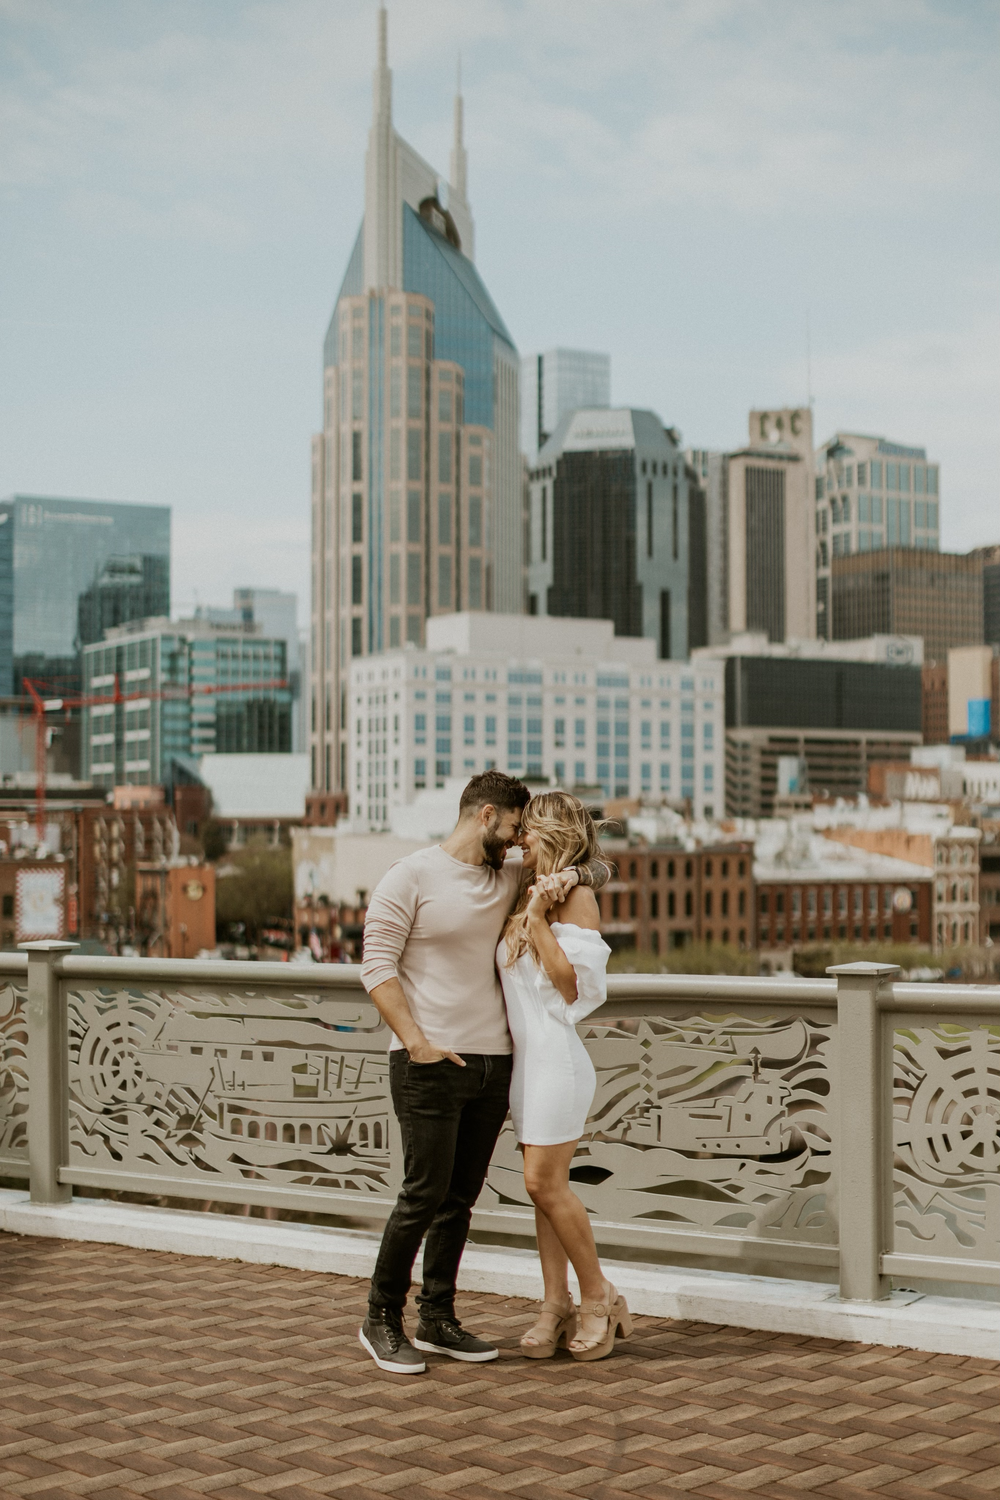 Couple sharing their love with one another on walking bridge.